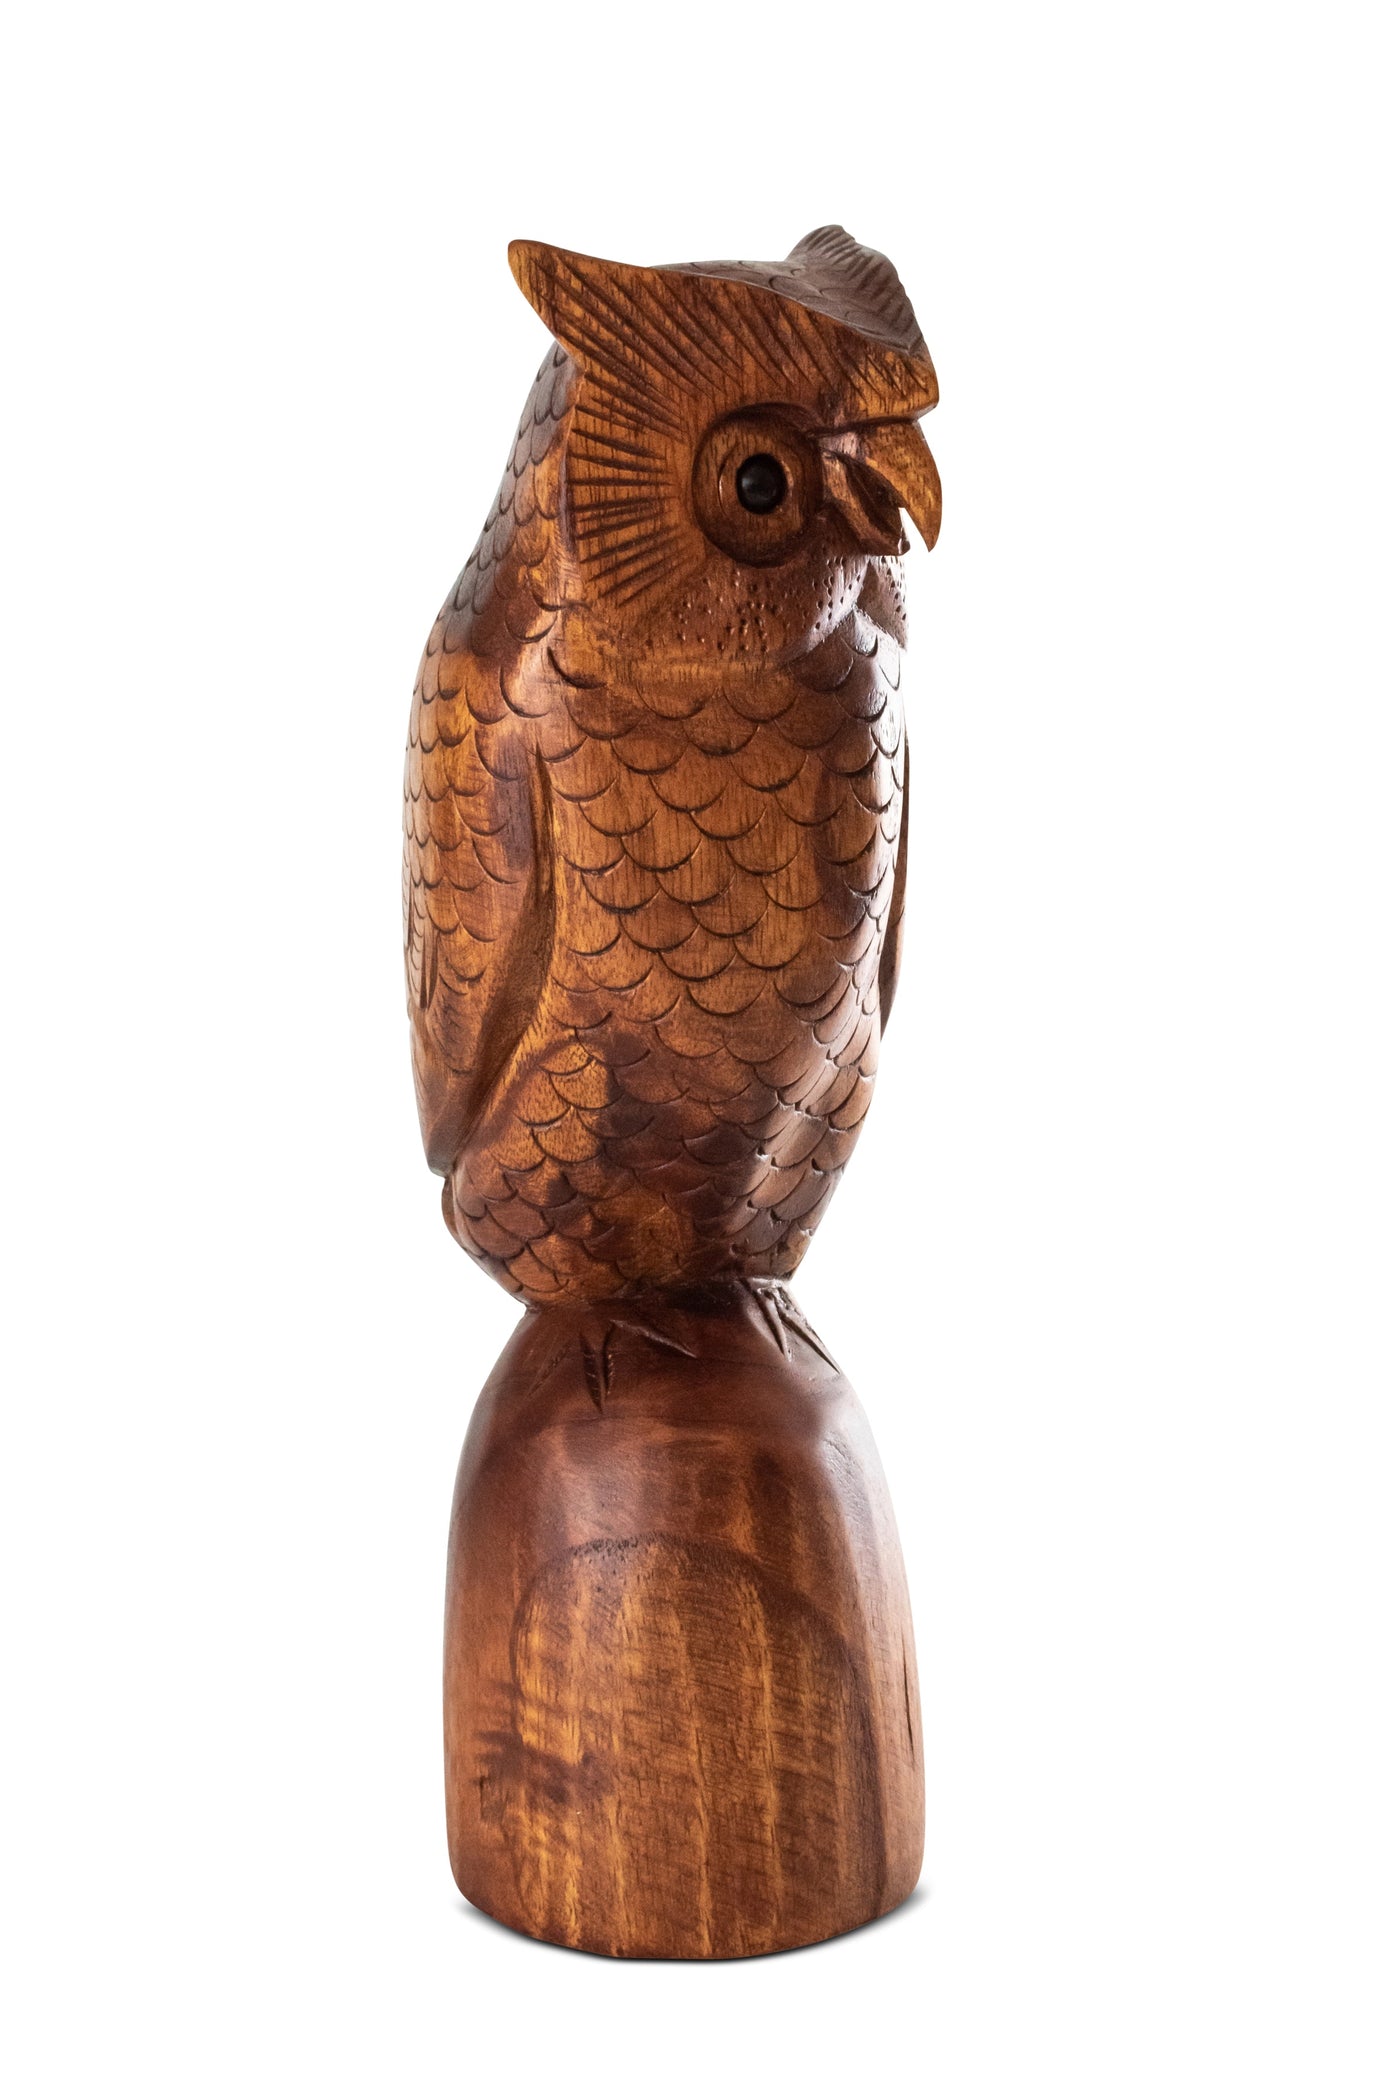 Wooden Handmade Owl Standing on a Tree Branch Statue Figurine Handcrafted Art Home Decor Hoot Sculpture Hand Carved Accent Decoration